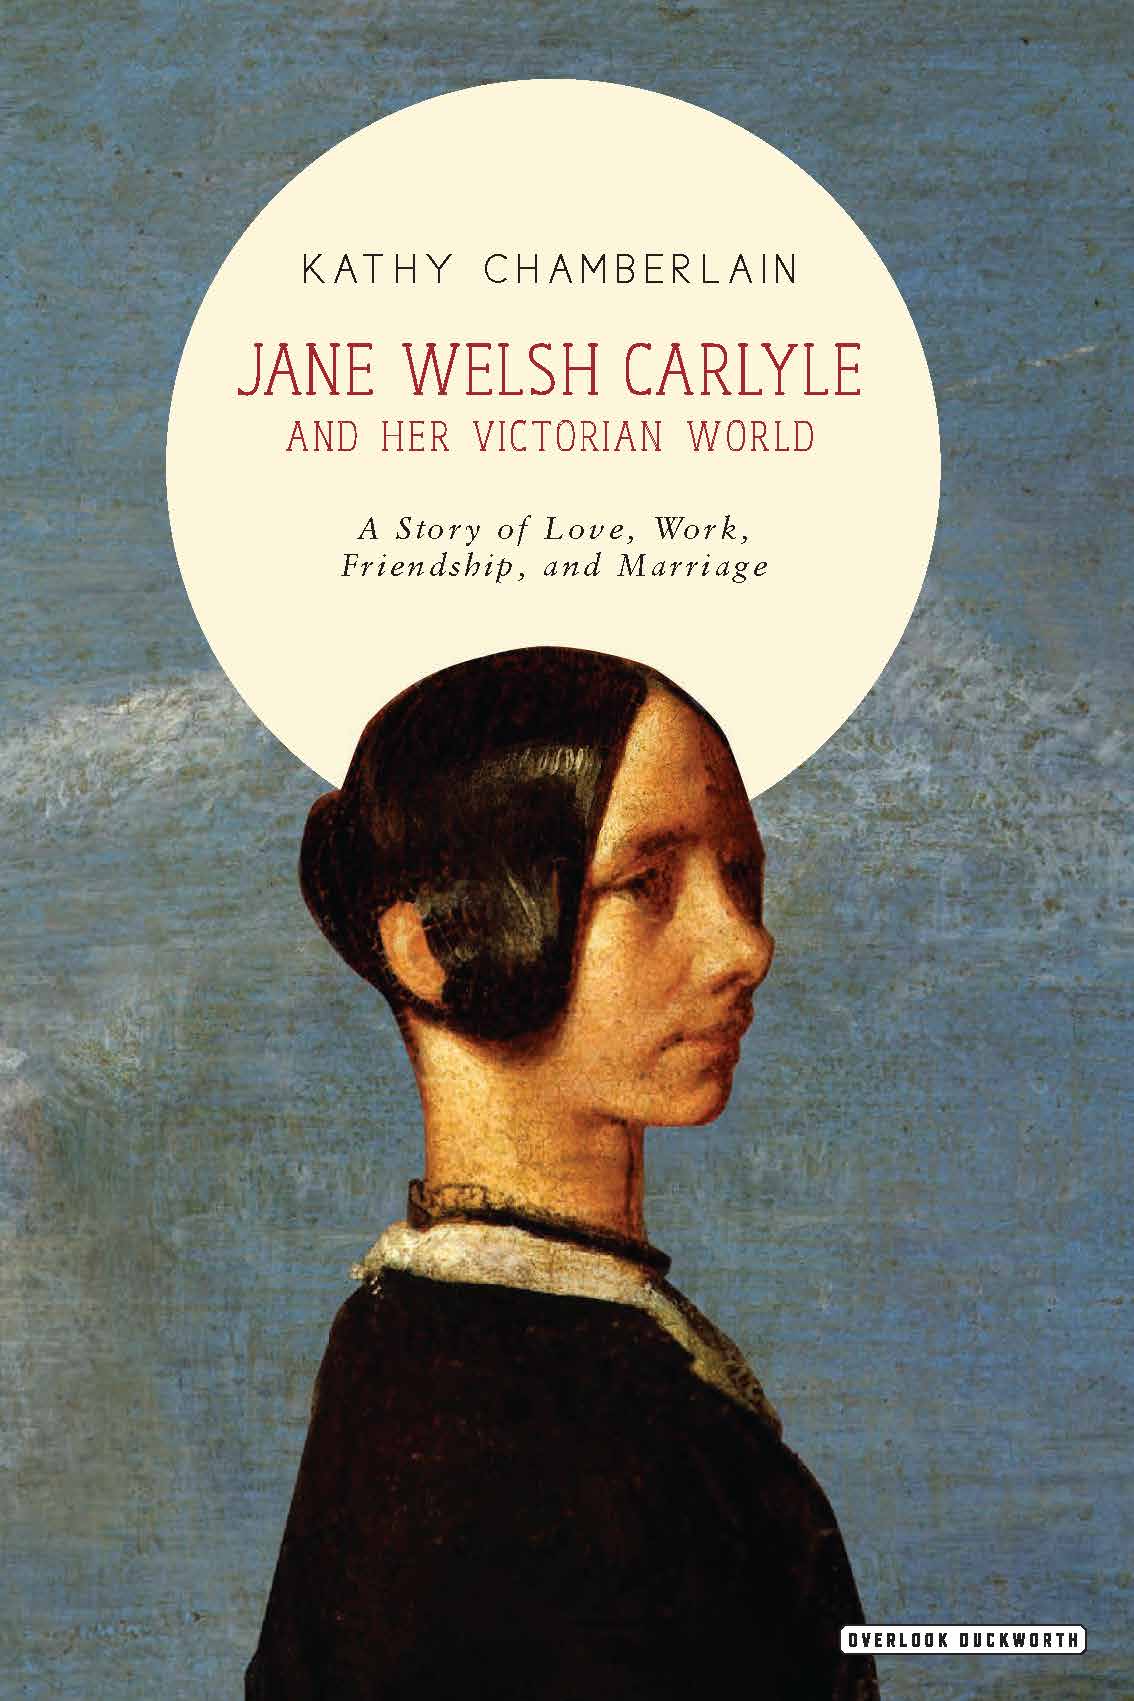 The virginity of jane welsh carlyle